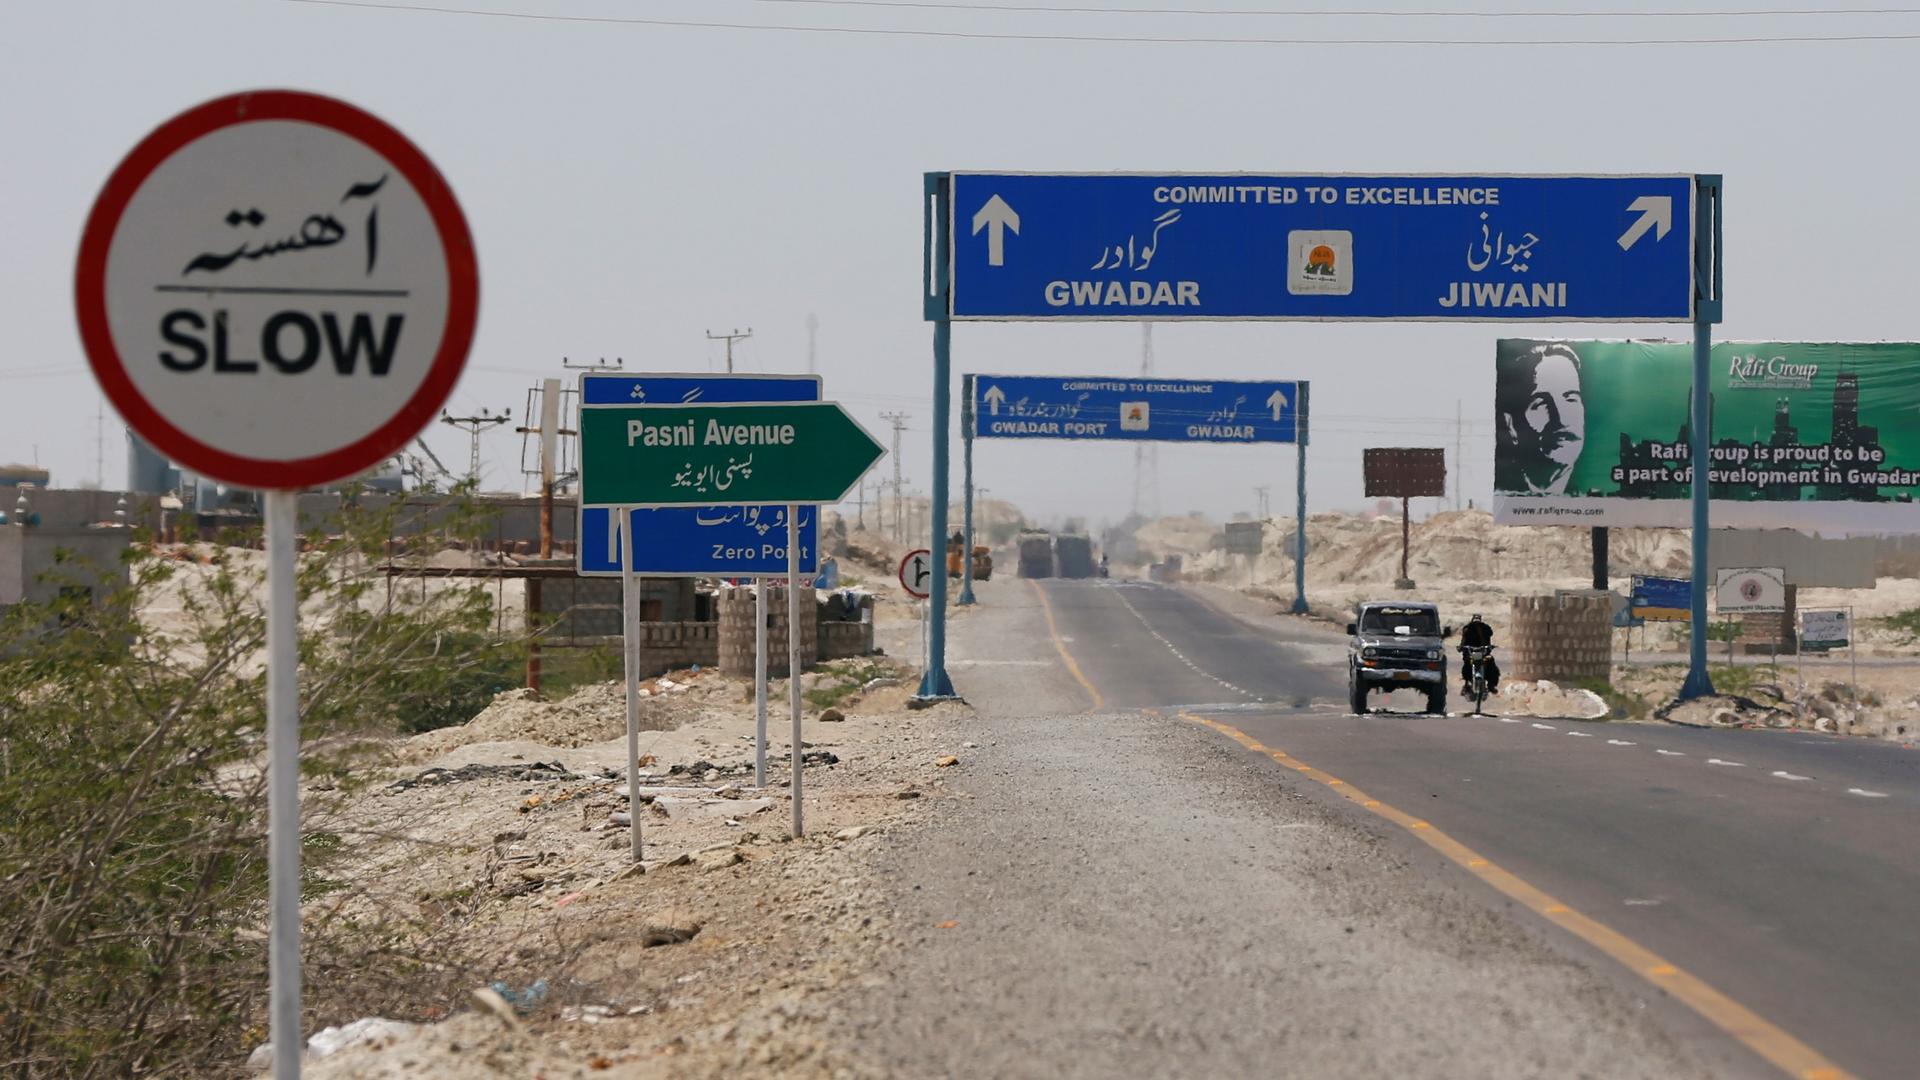 A general view of signs along a highway leading to Gwadar, Pakistan, April 12, 2017.